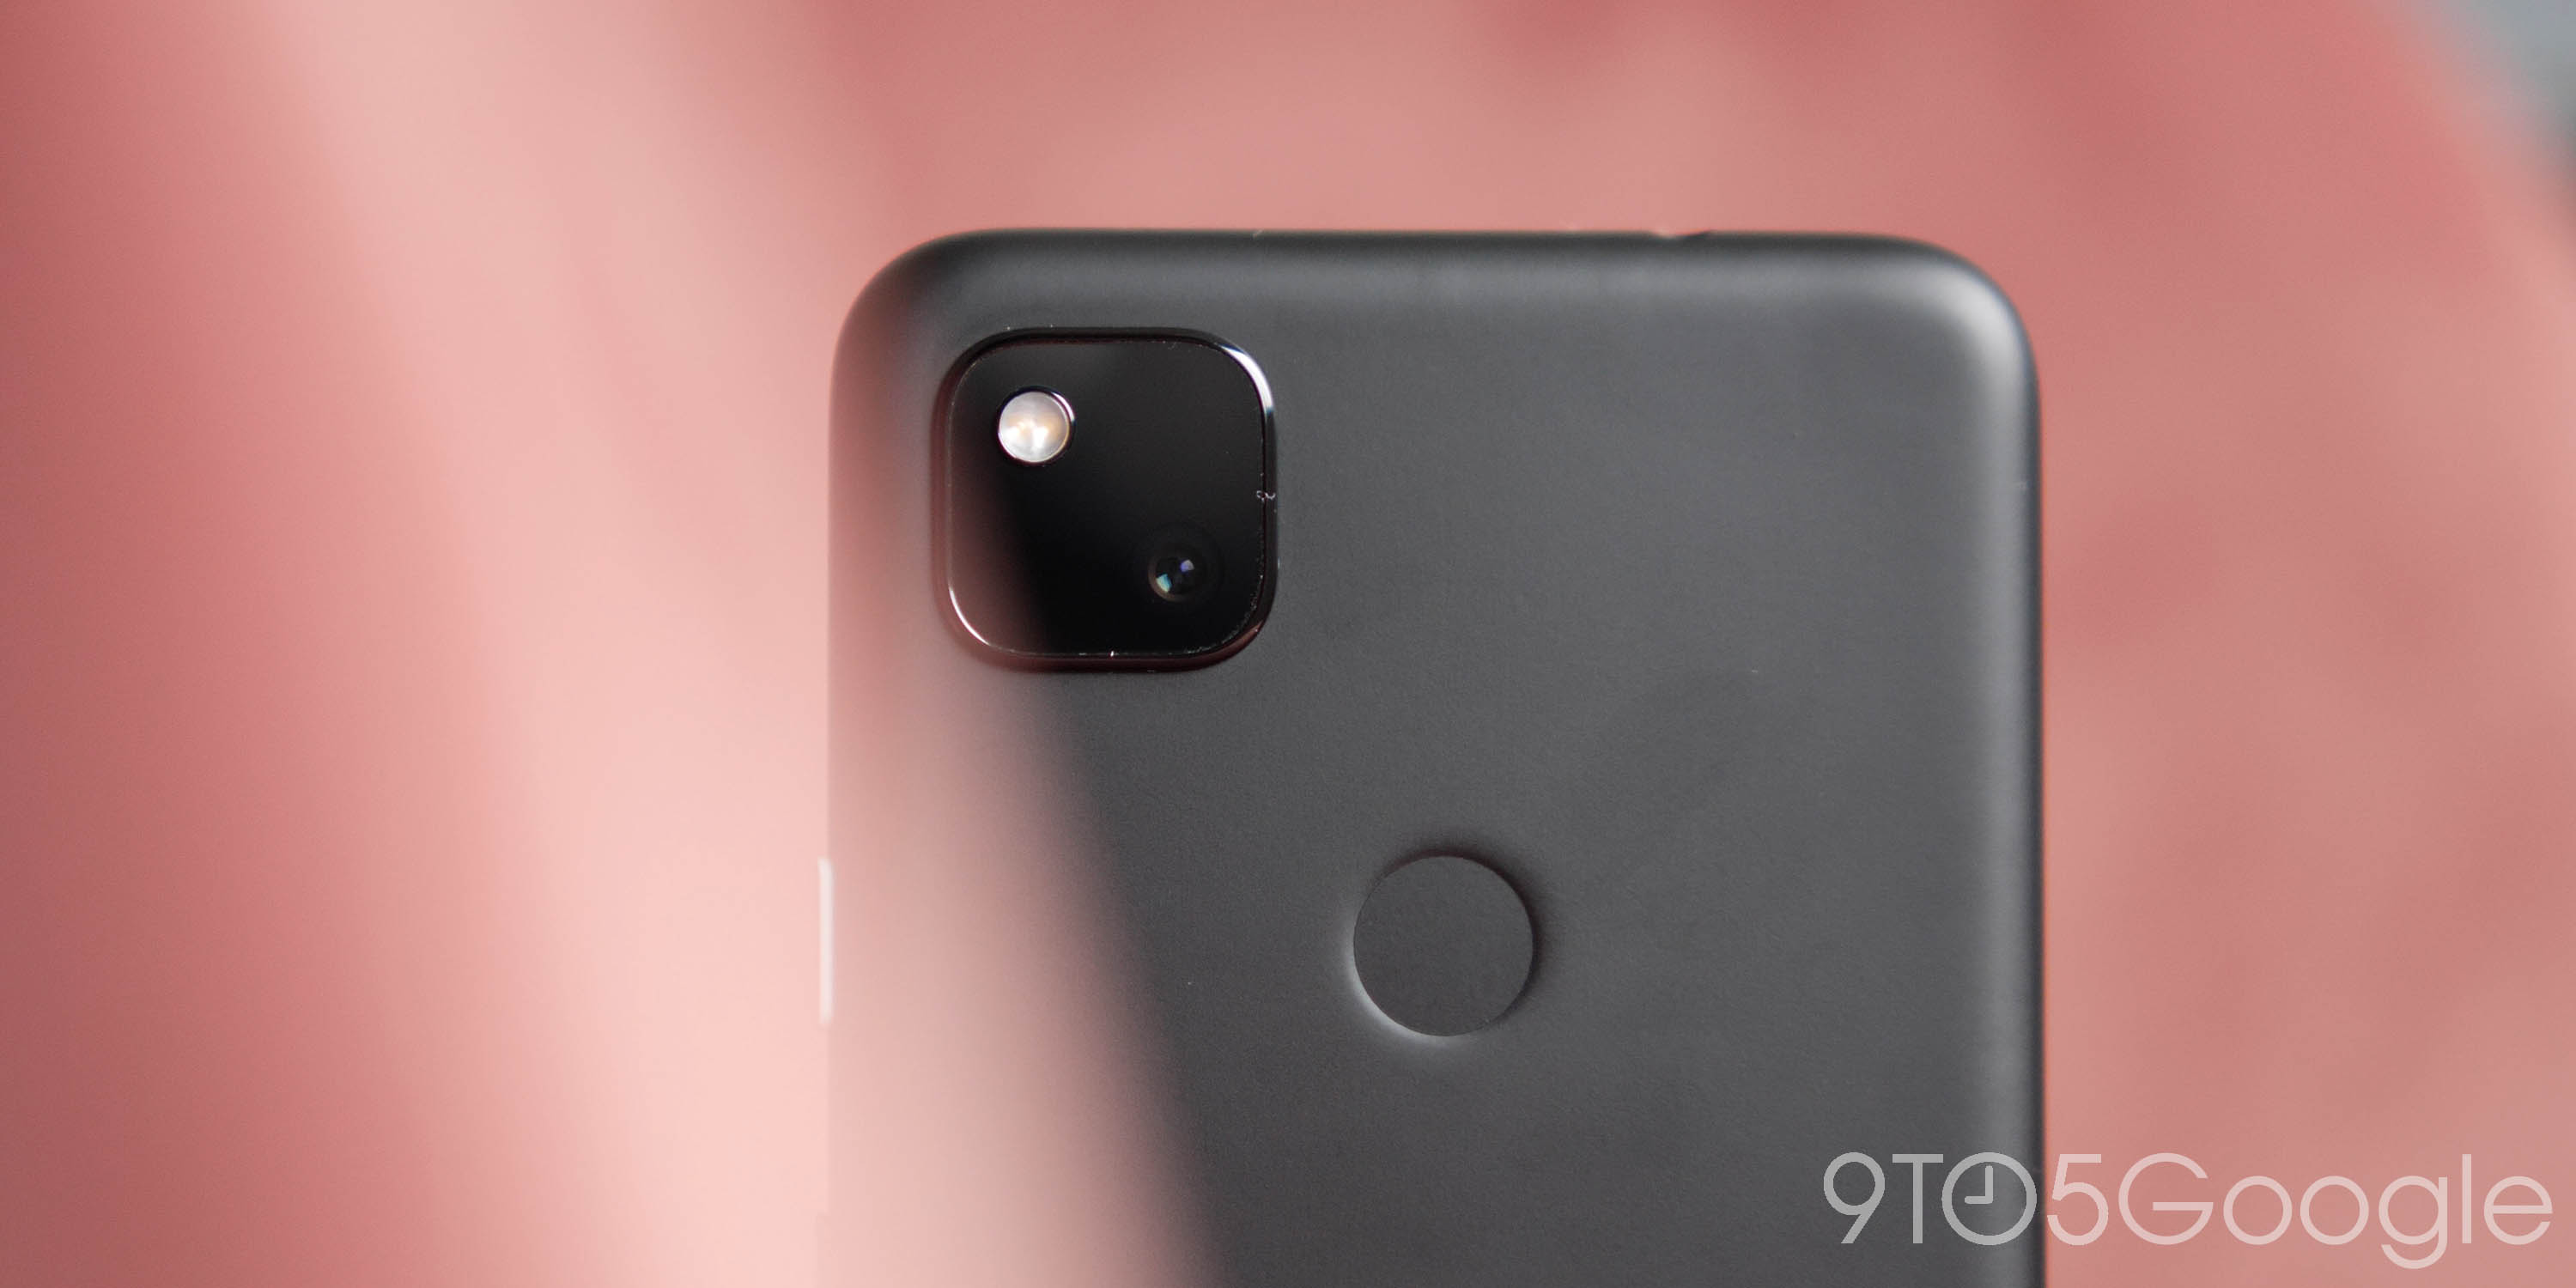 Pixel 3a vs. Pixel 4a: Worth the upgrade? [Video] - 9to5Google